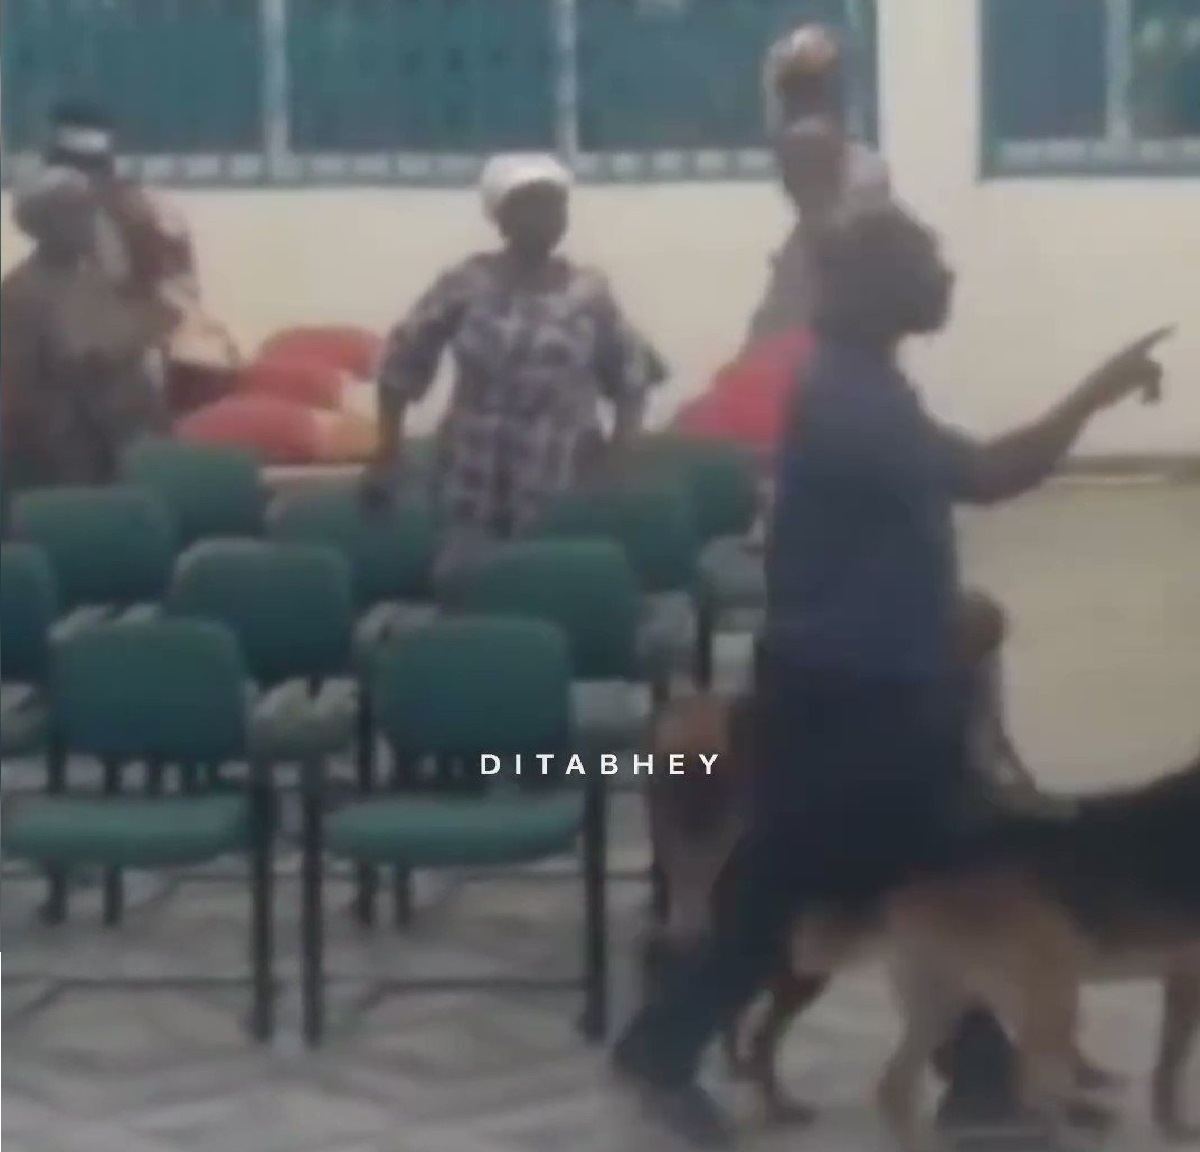 Angry Neighbour Storms Church with Fierce Dogs, Interrupts Sermon over Noise Complaint